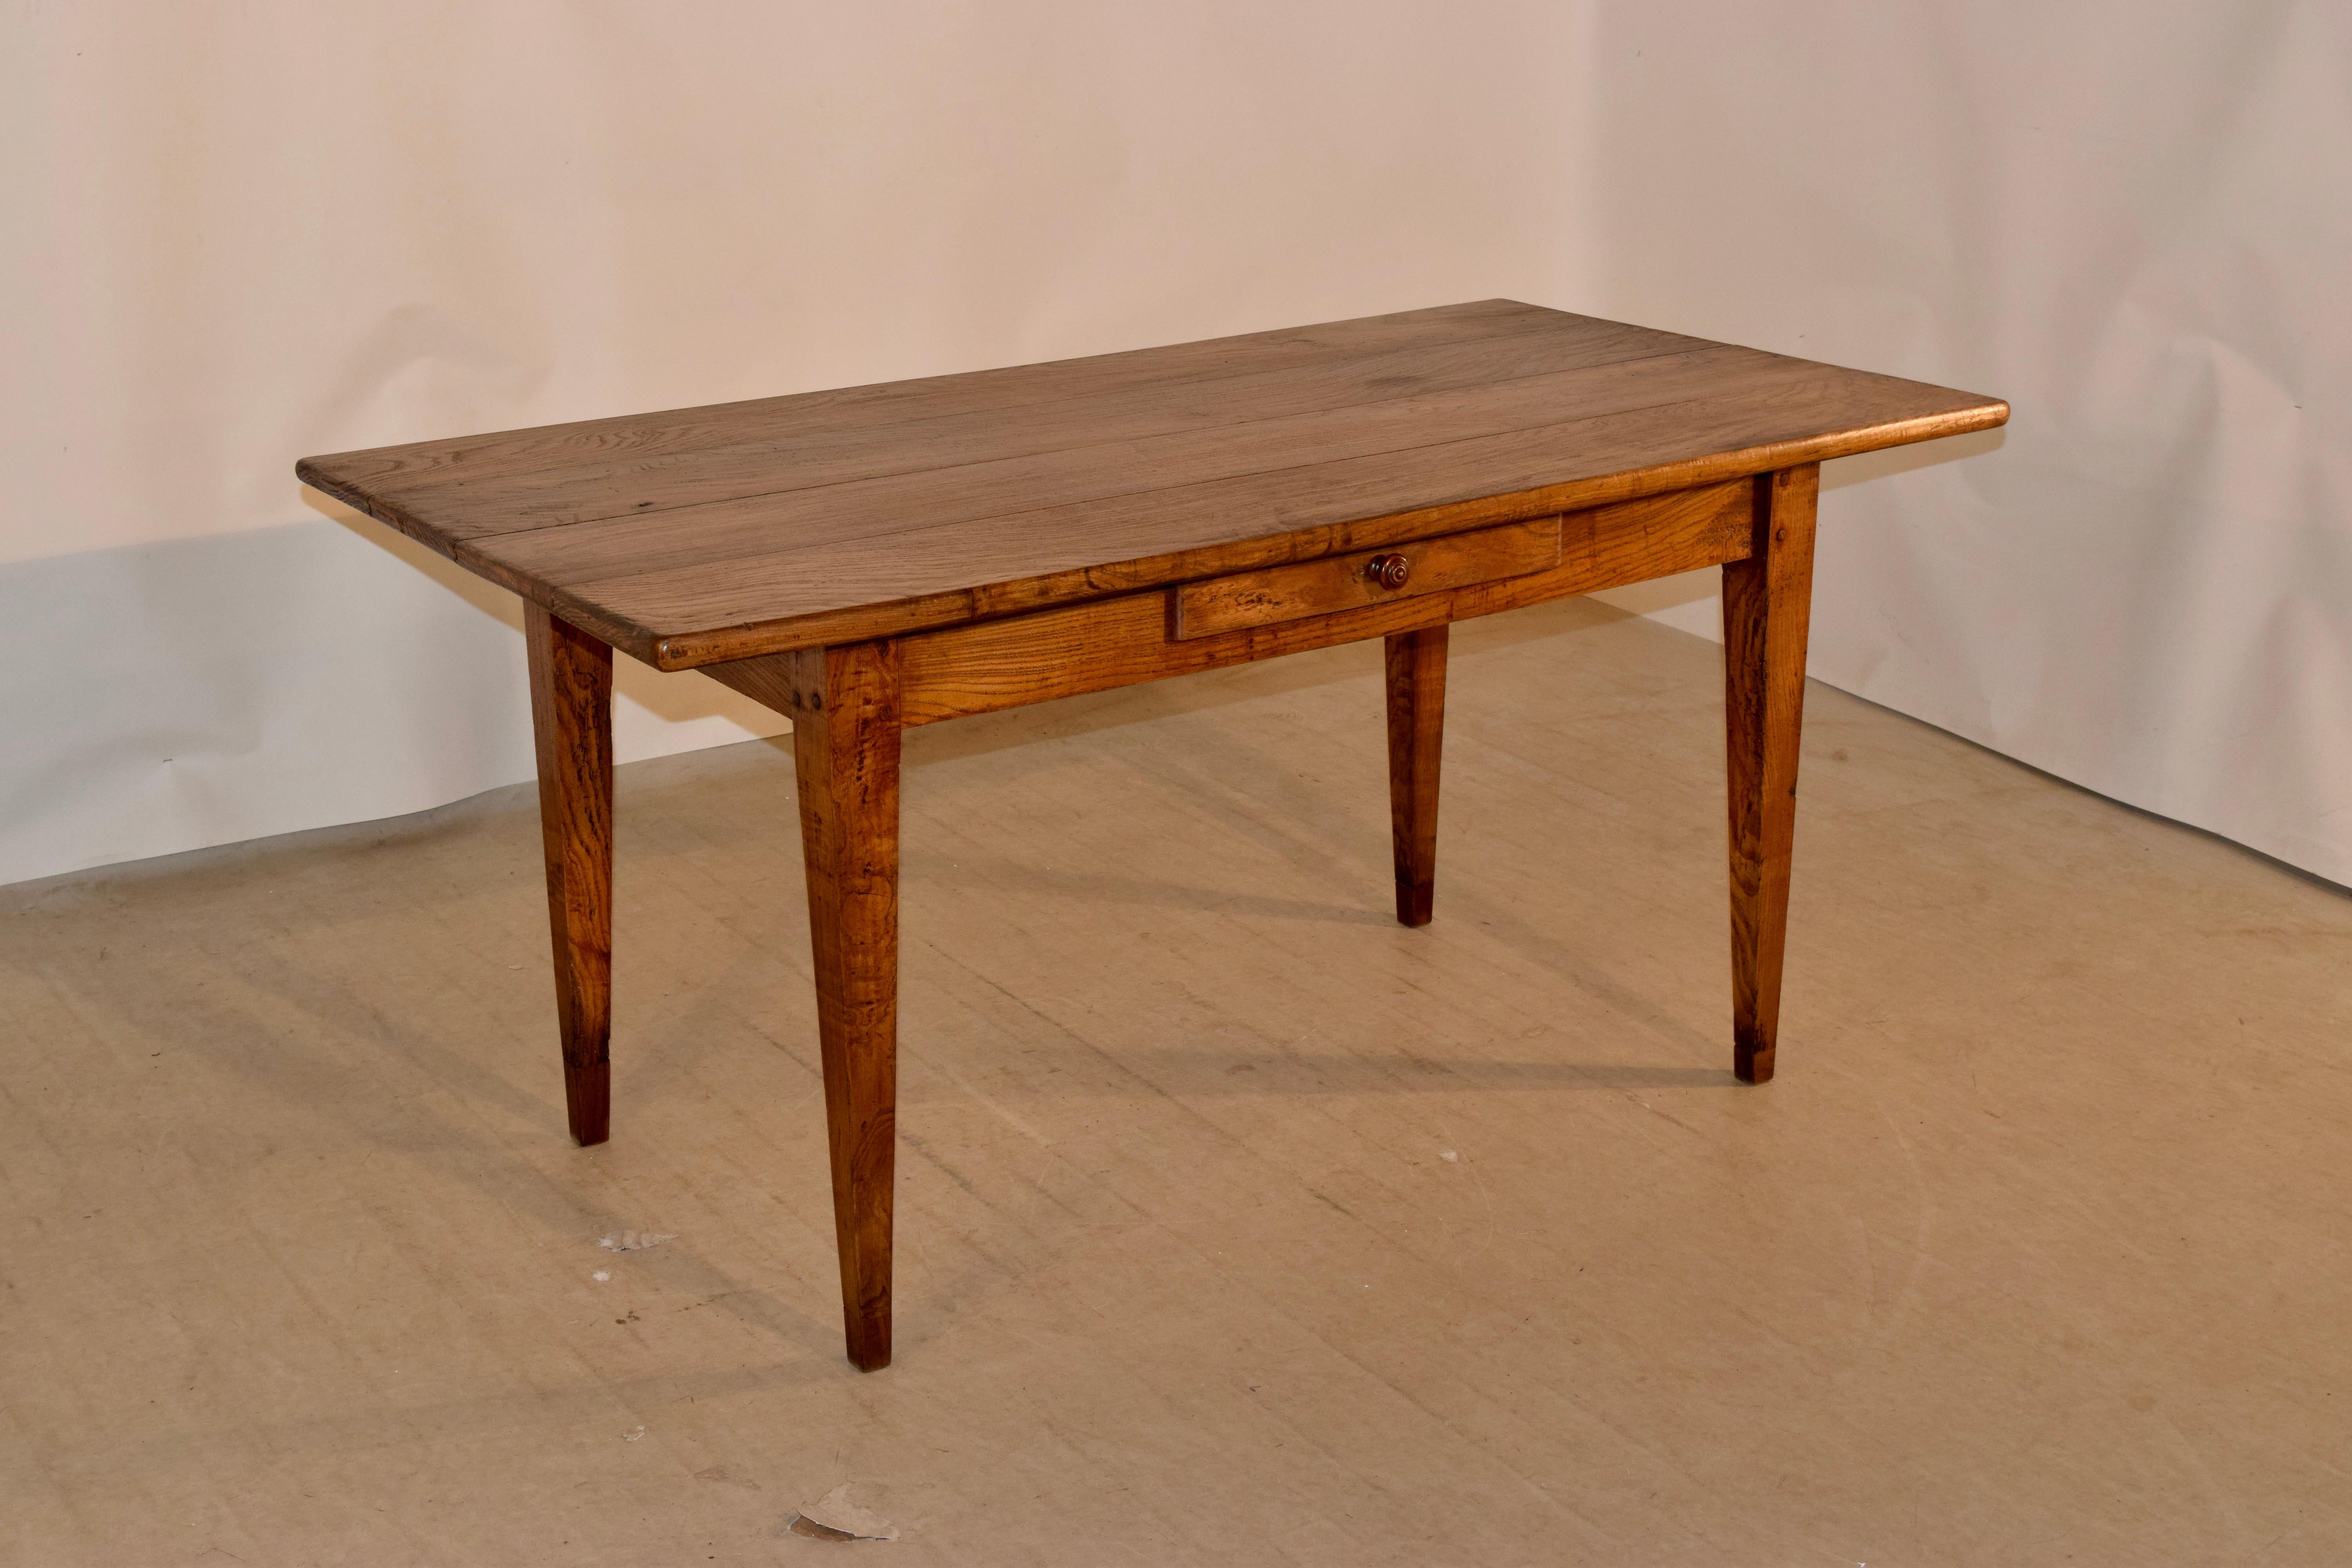 19th century elm farm table from France with wonderfully simple lines. It has a four board top and follows down to a very simple apron containing a single drawer and supported on tapered legs, which have been tipped to add height. The apron measures